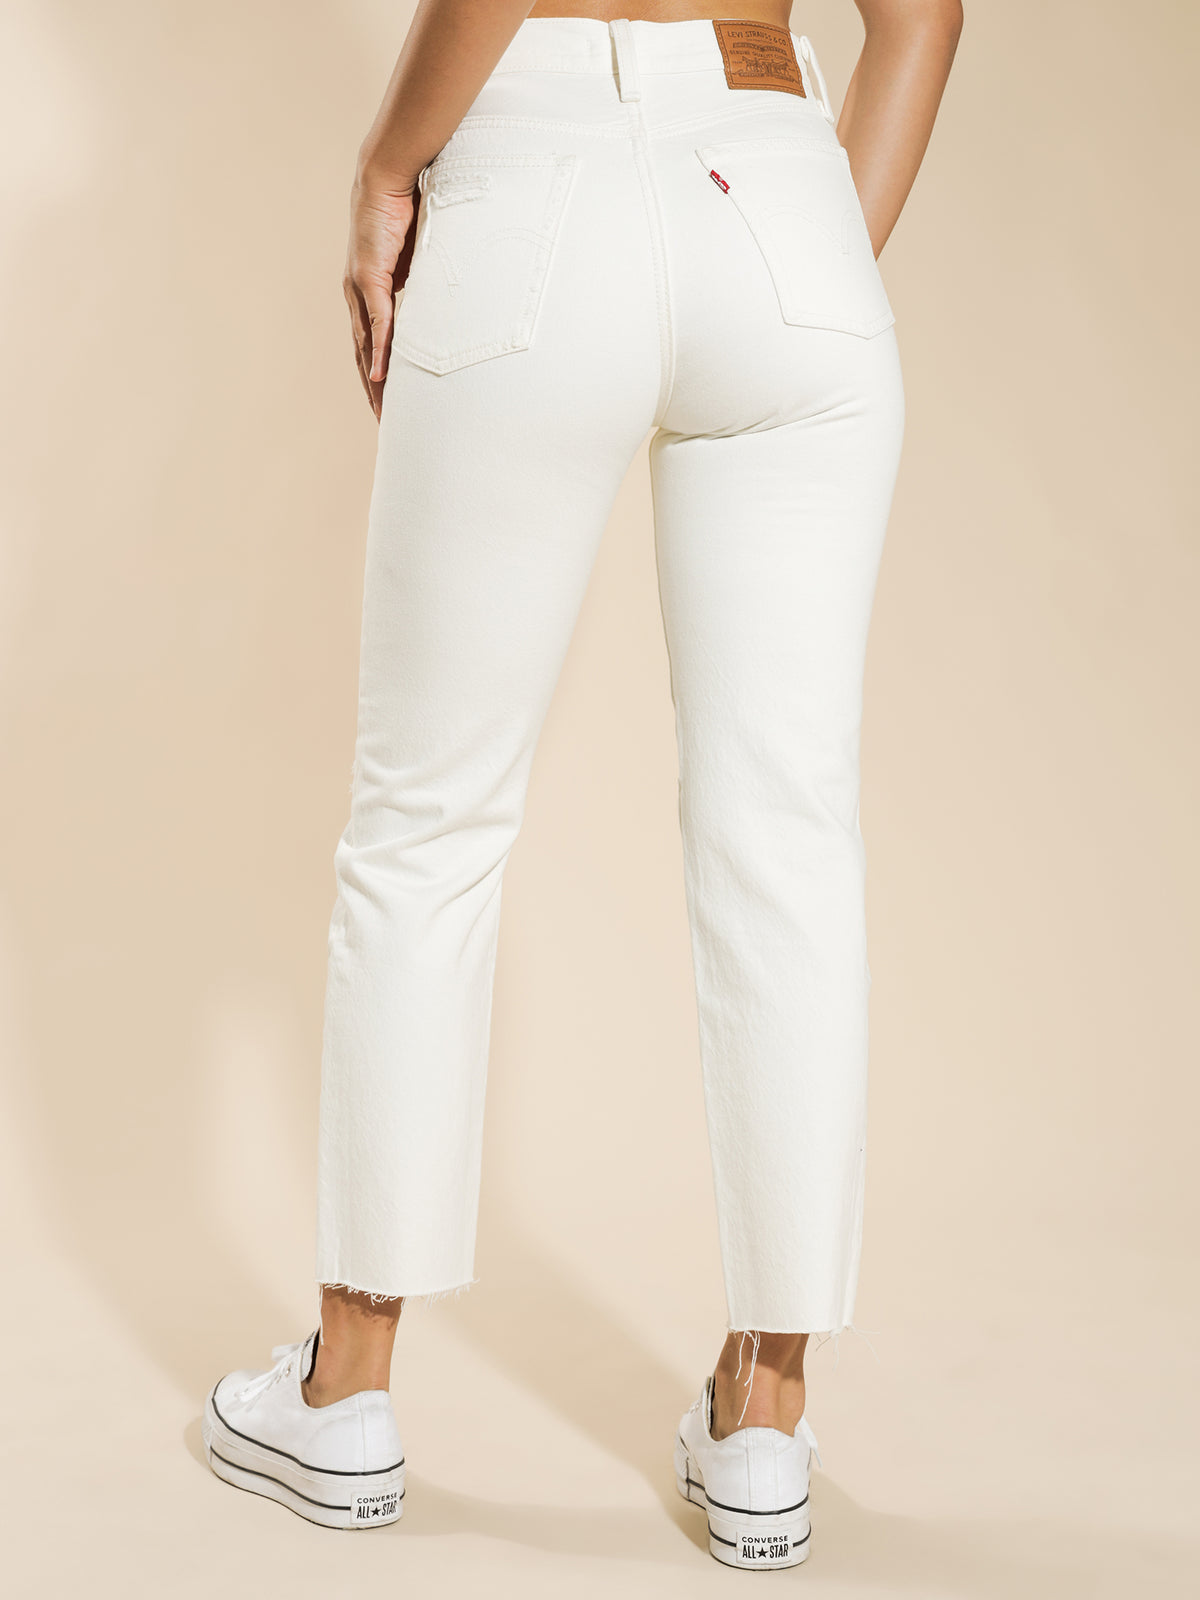 Wedgie Fit Straight Jeans in Cloud Bank